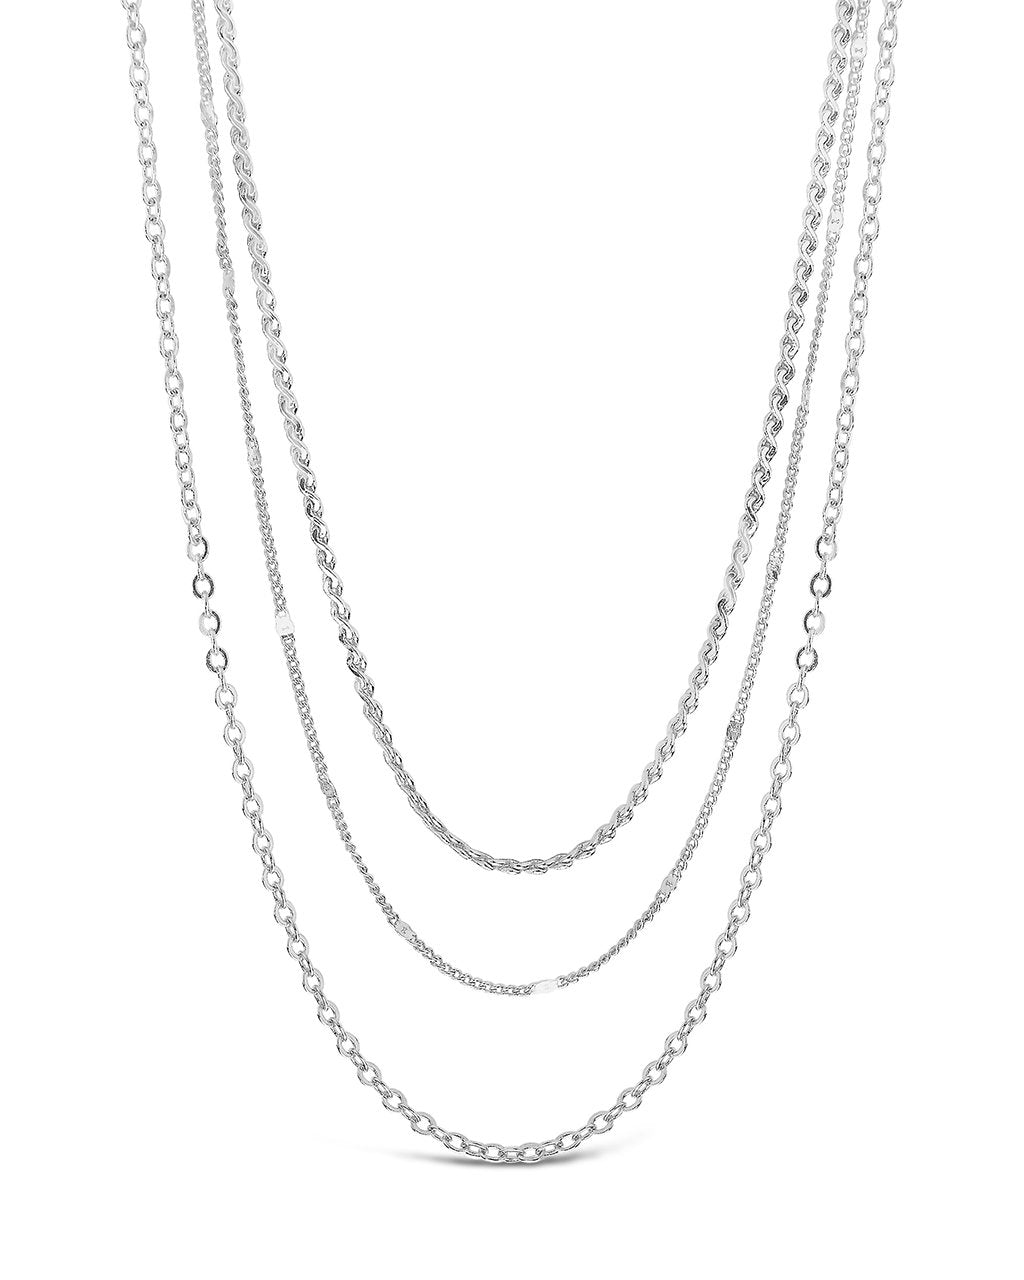 Silver Necklace, Silver Chain Necklace, Layering Necklace, Dainty